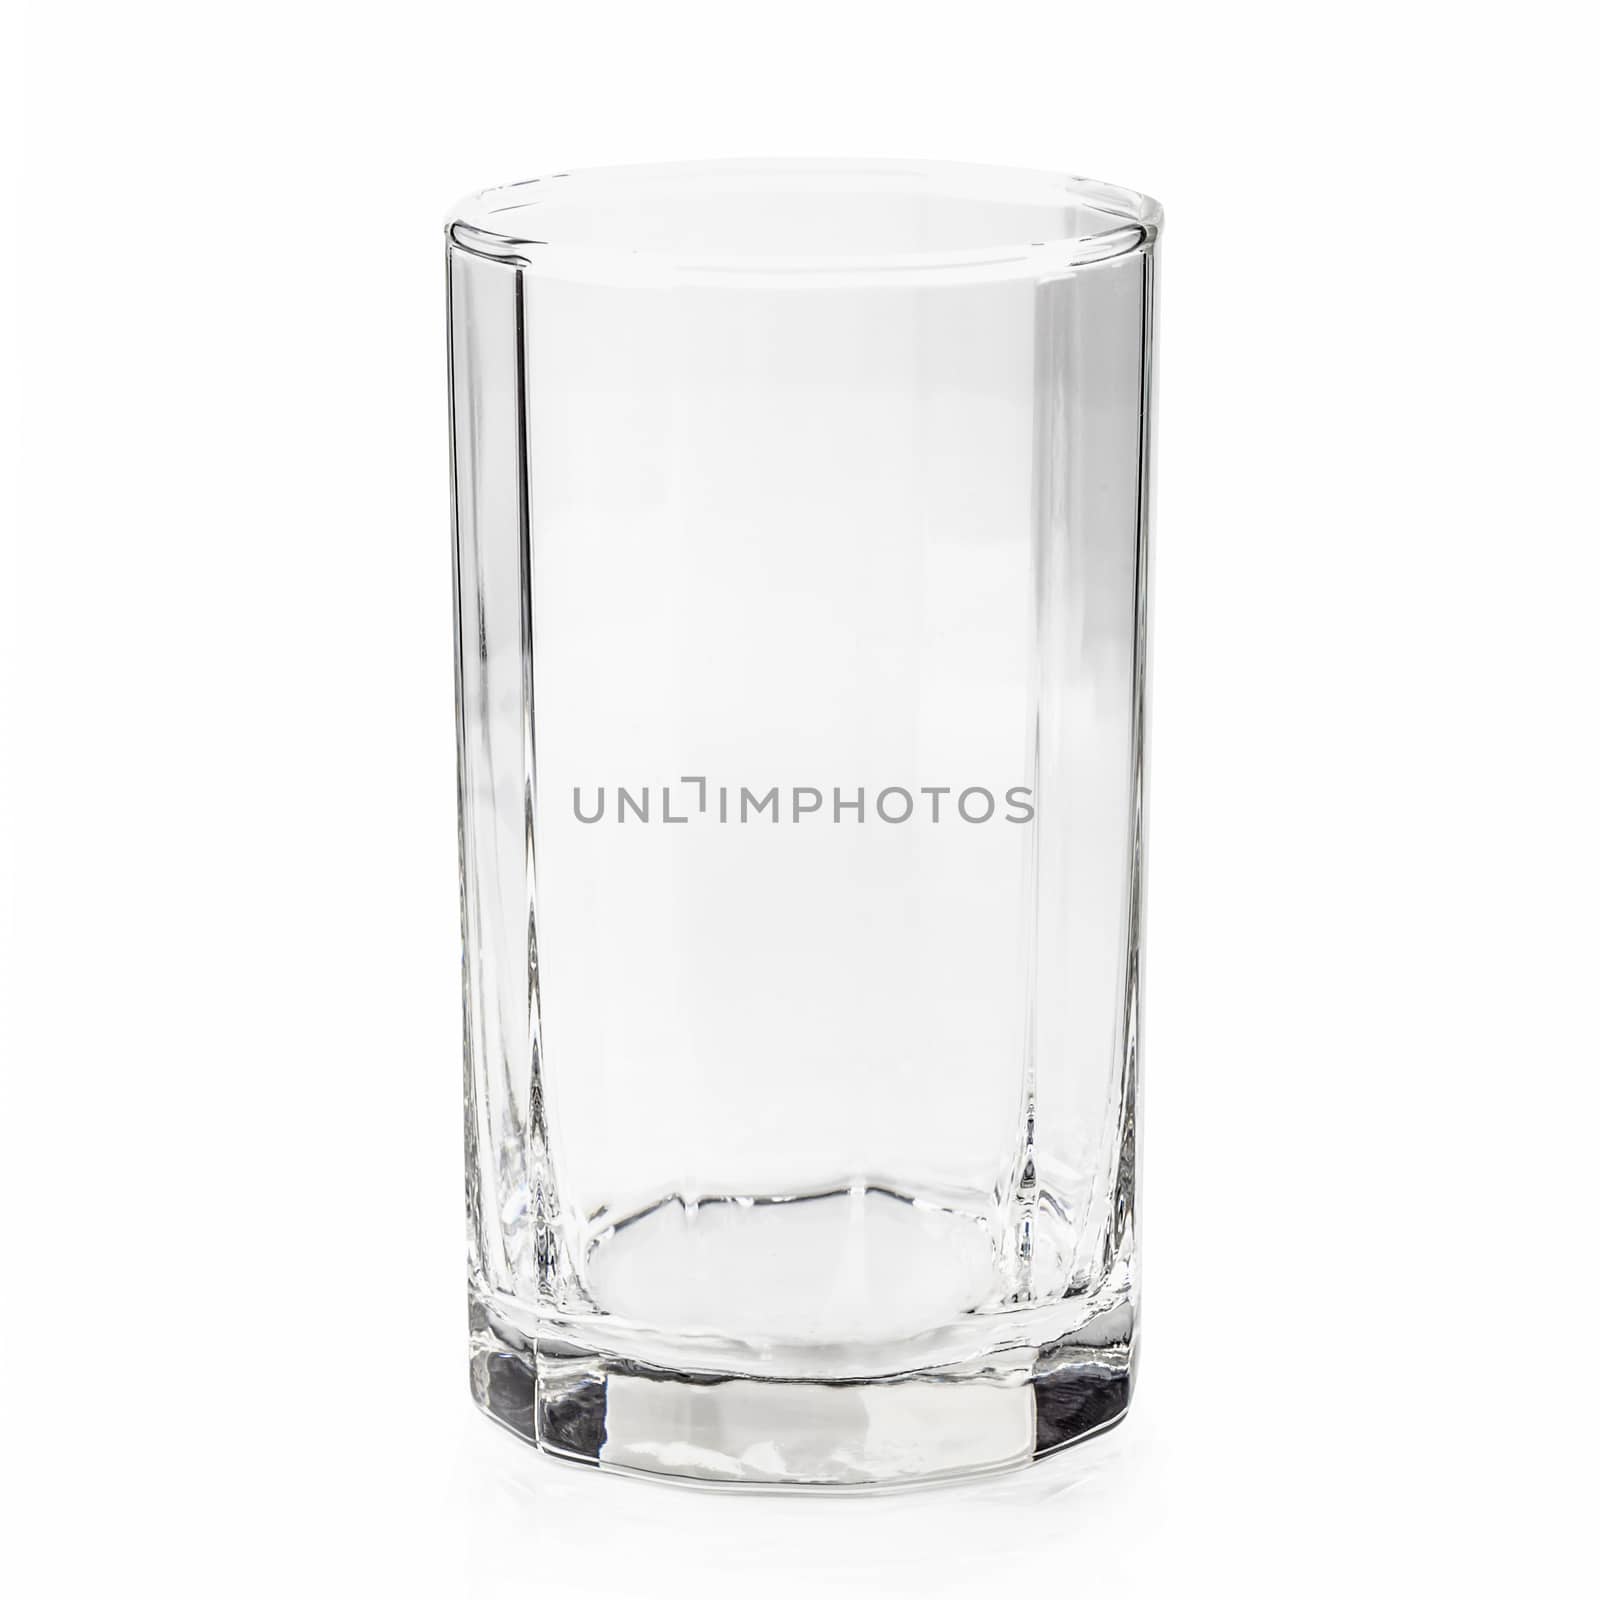 Empty glass isolated on a white background.